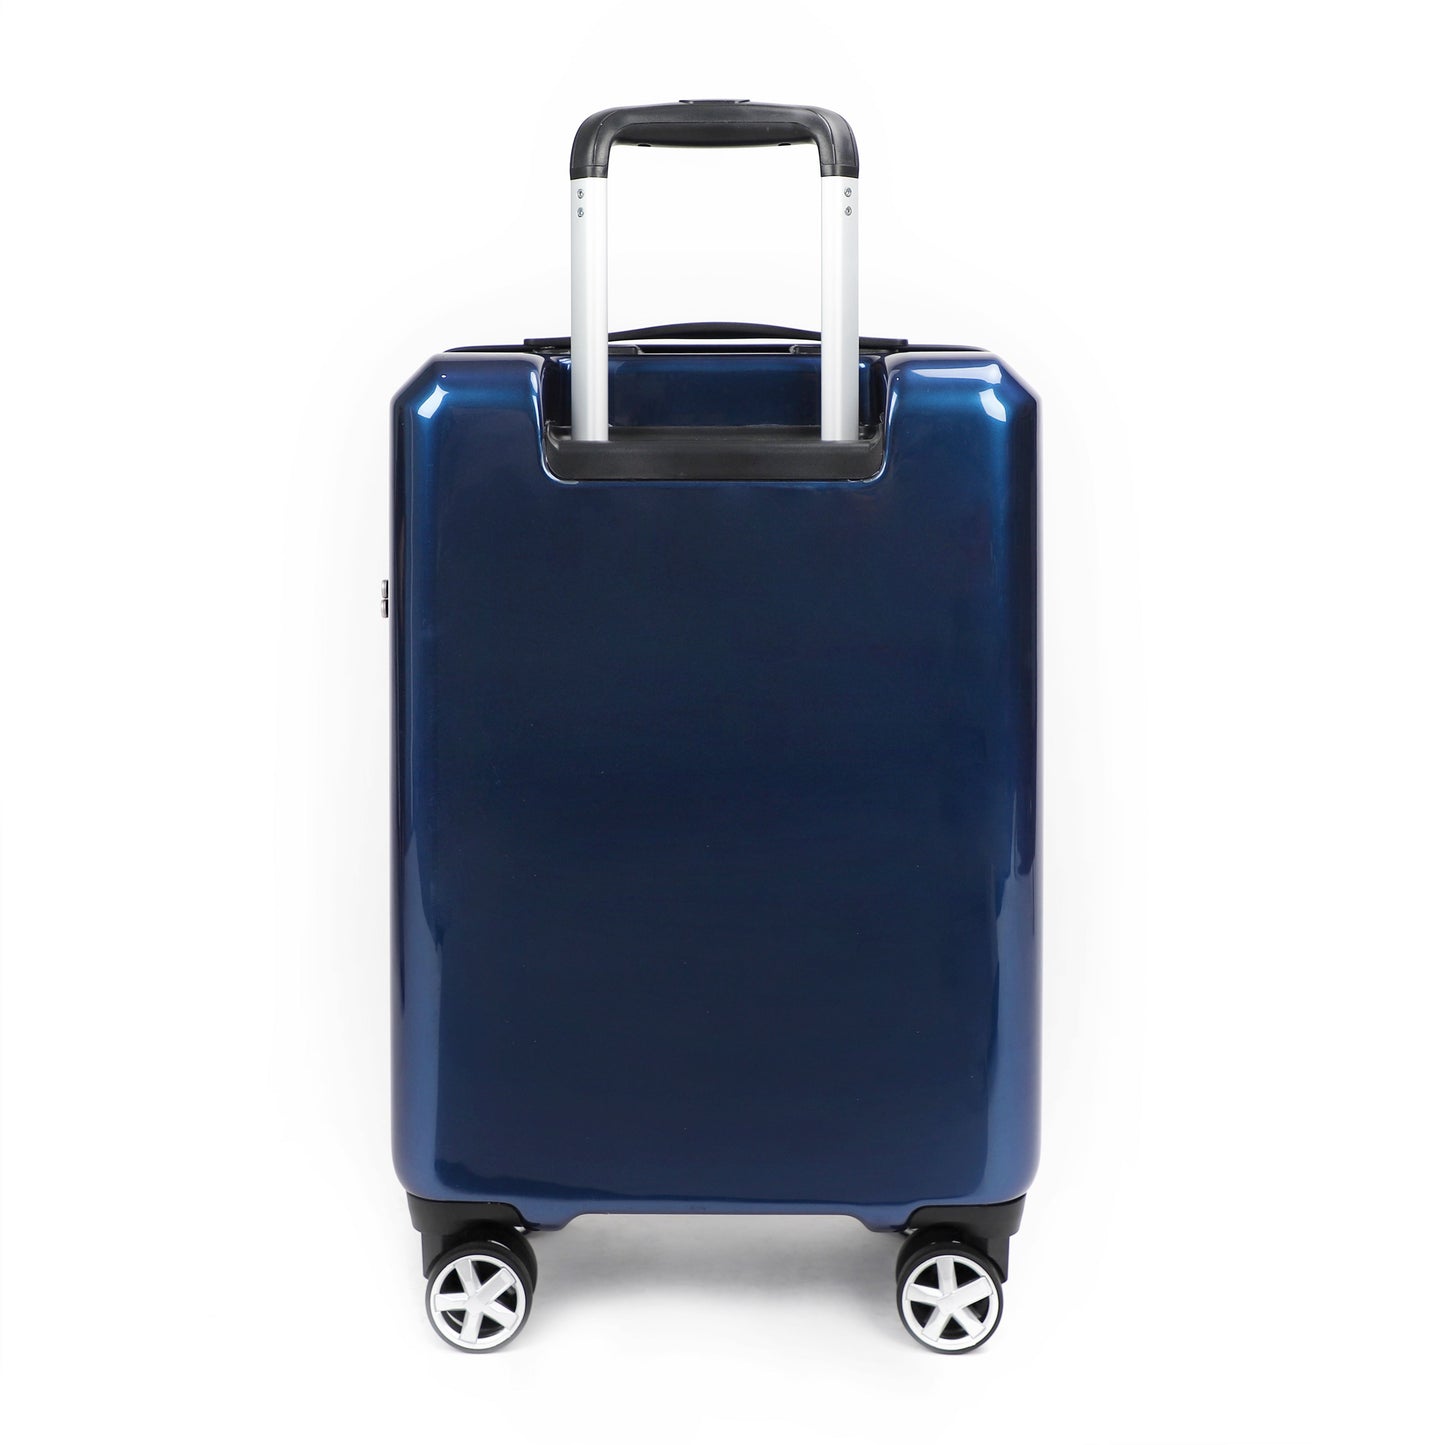 Airline_Carry_On_Luggage_Blue_rear_view_T1978155005